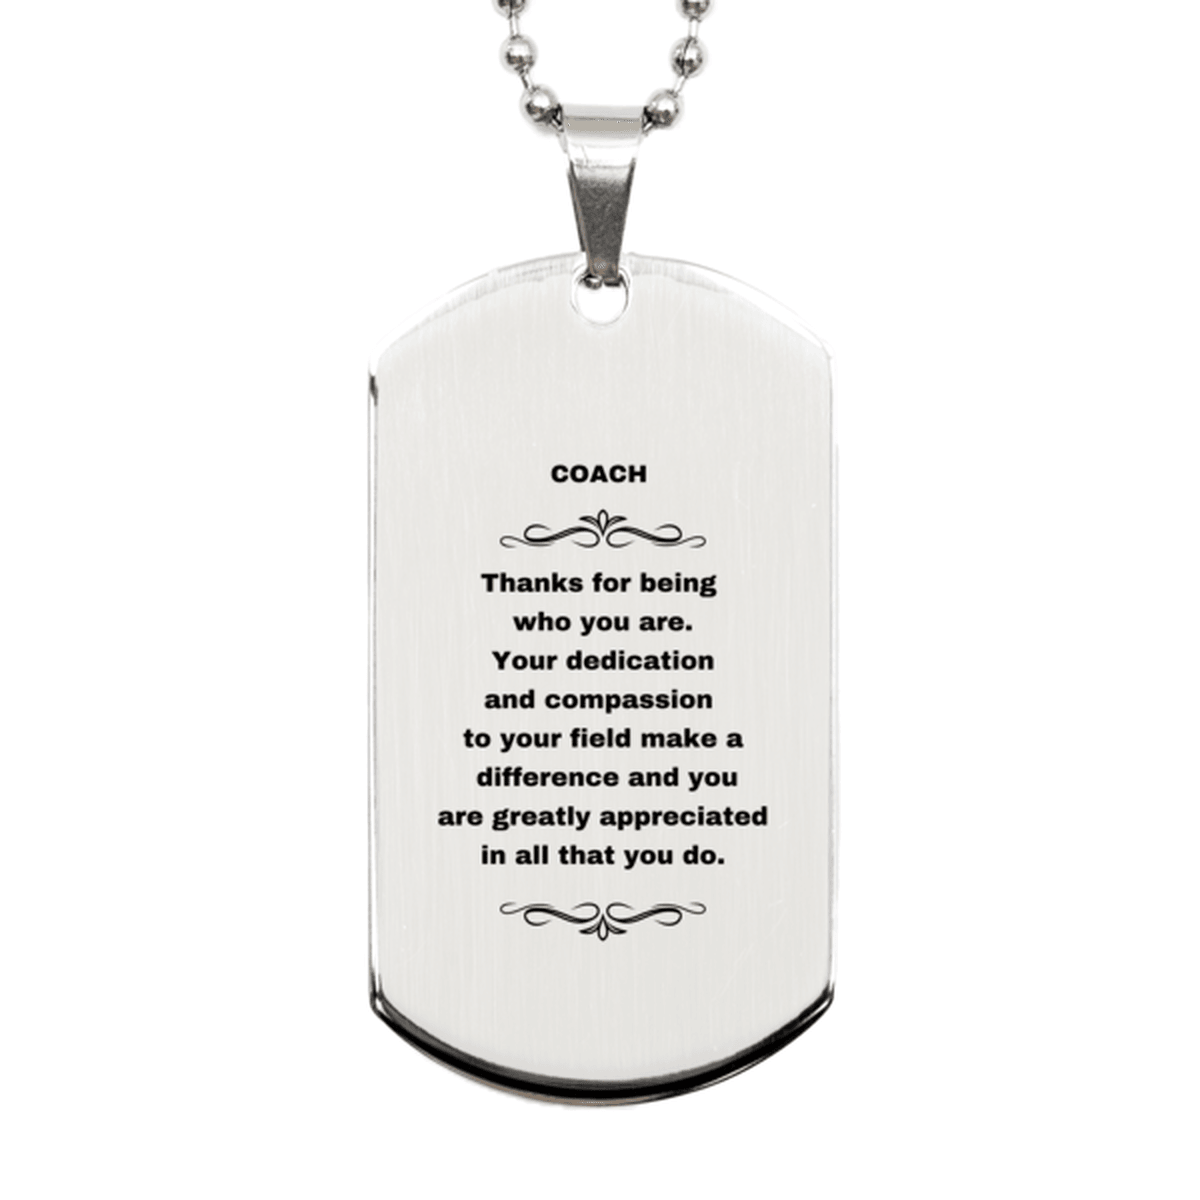 Coach Silver Dog Tag Engraved Necklace - Thanks for being who you are - Birthday Christmas Jewelry Gifts Coworkers Colleague Boss - Mallard Moon Gift Shop